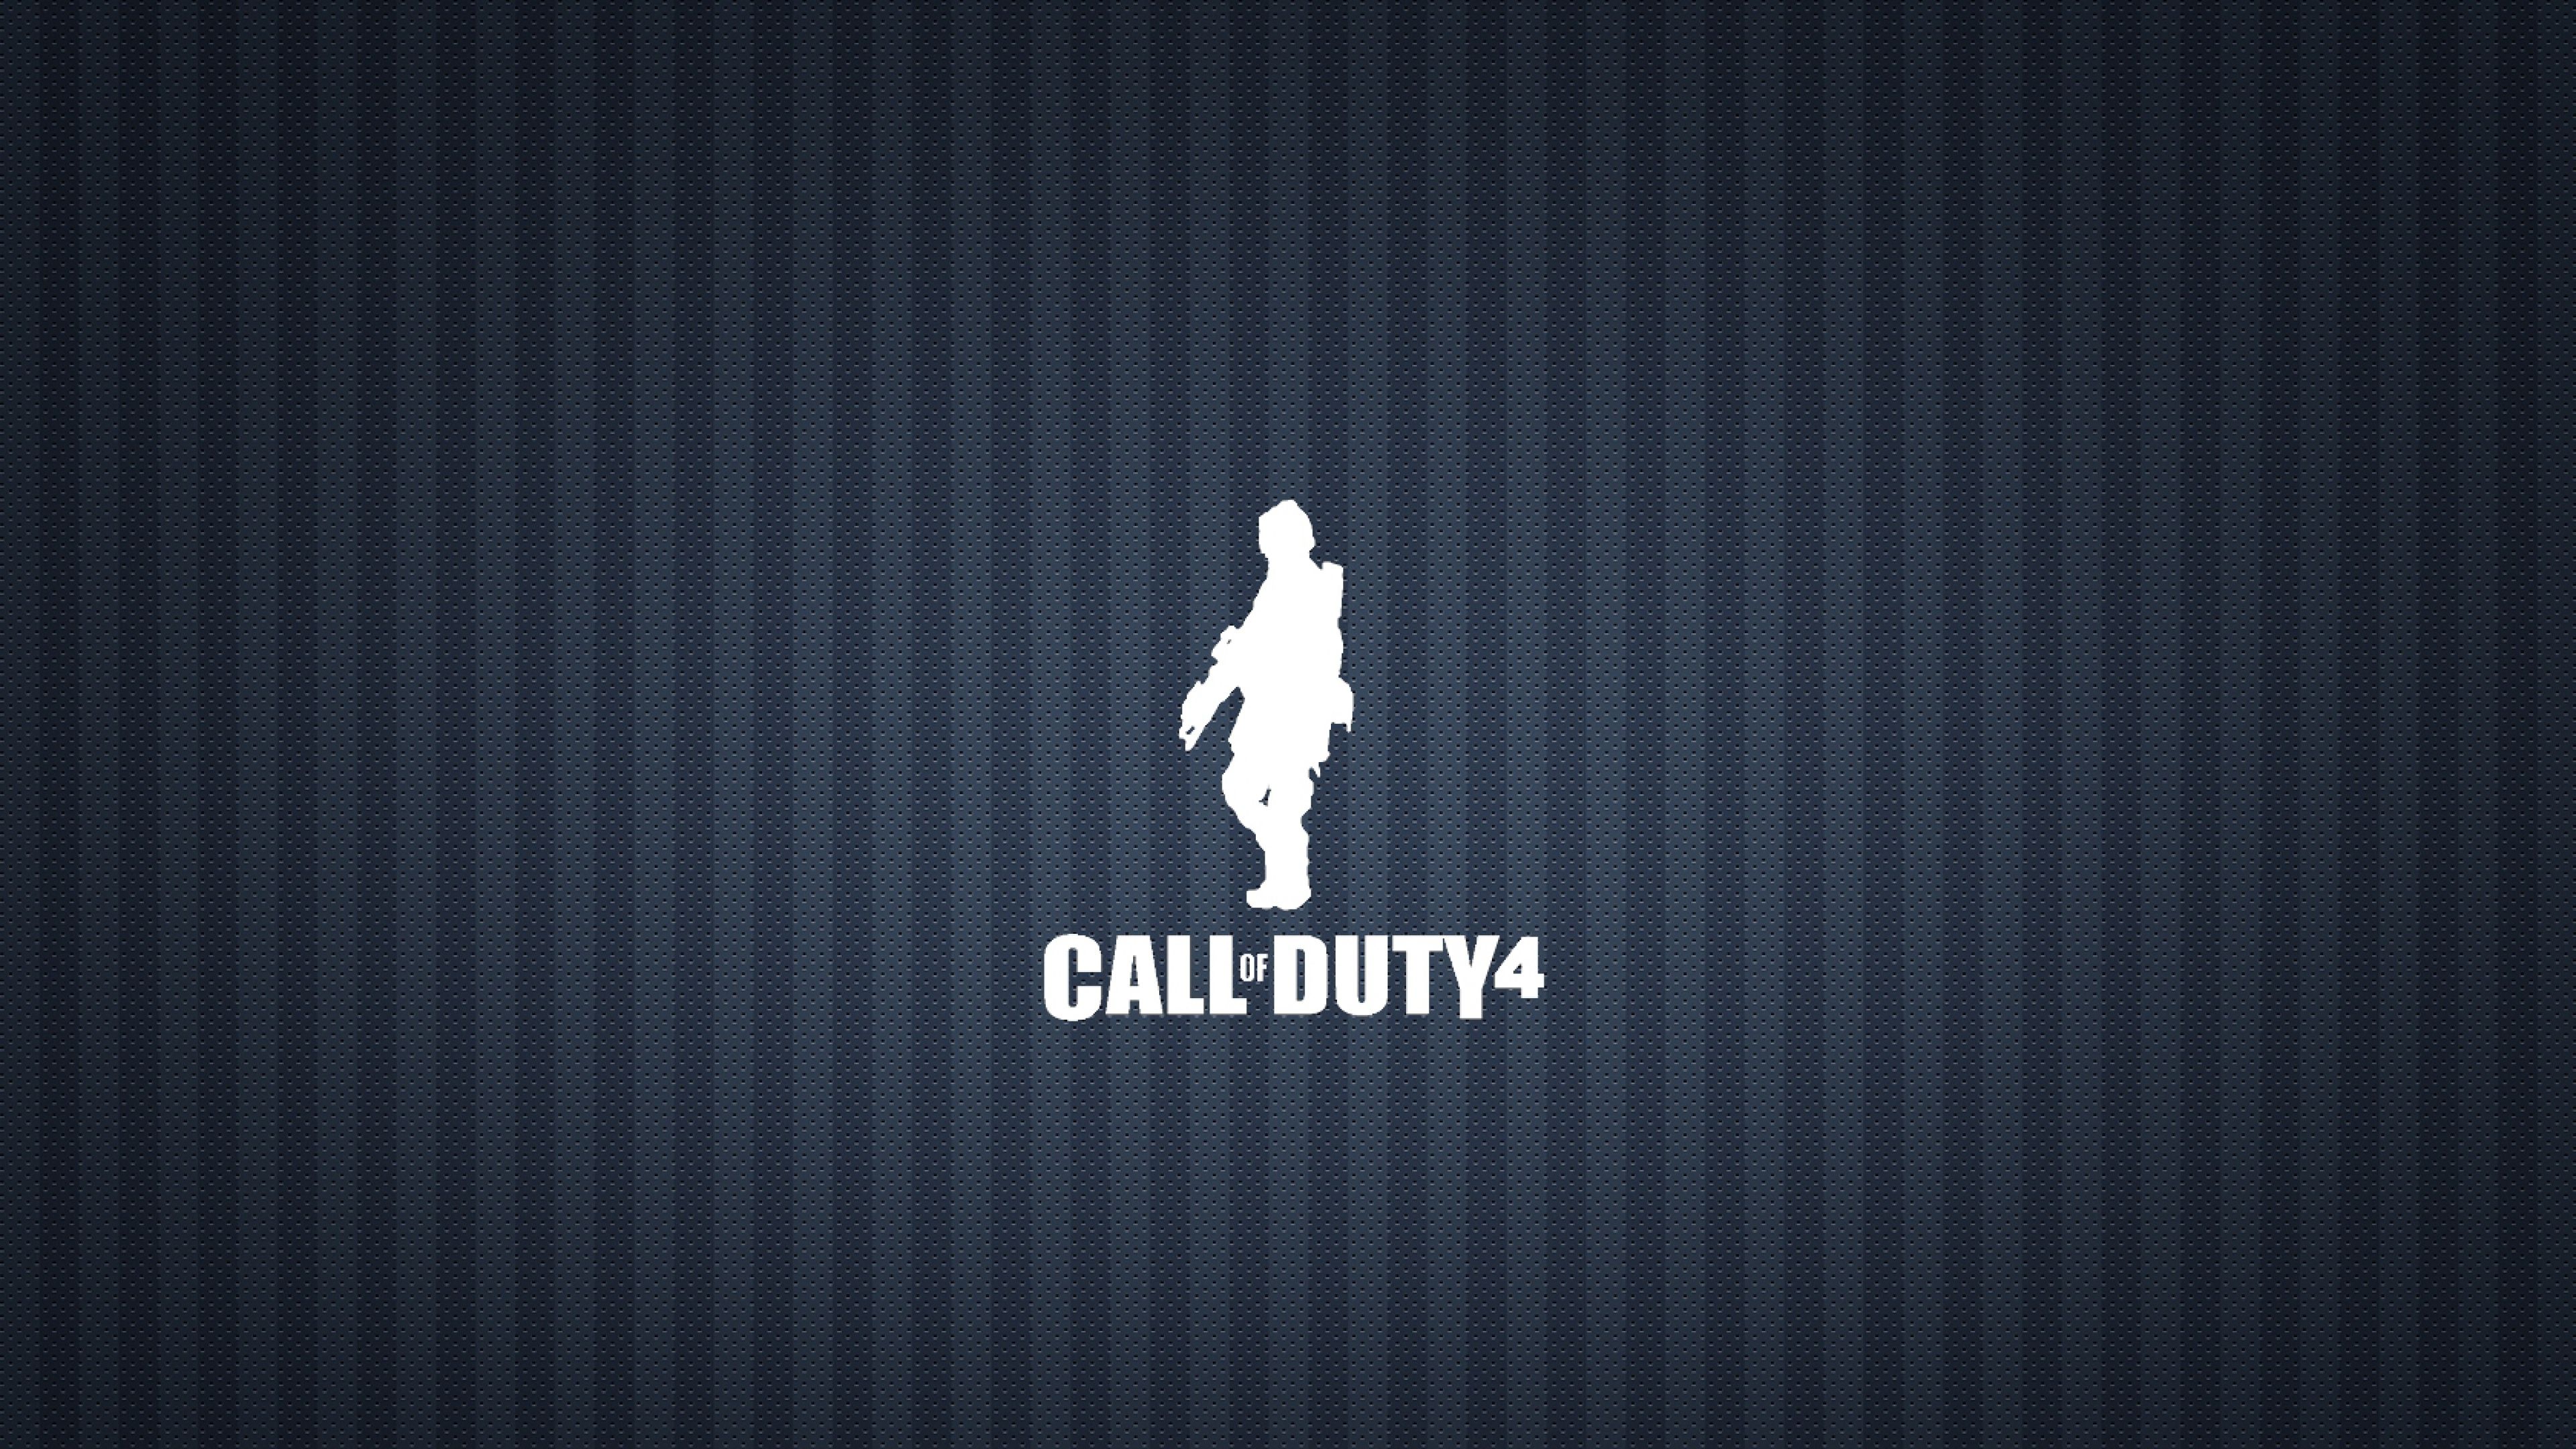 Download Wallpaper 3840x2160 Call of duty 4, Background, Game ...